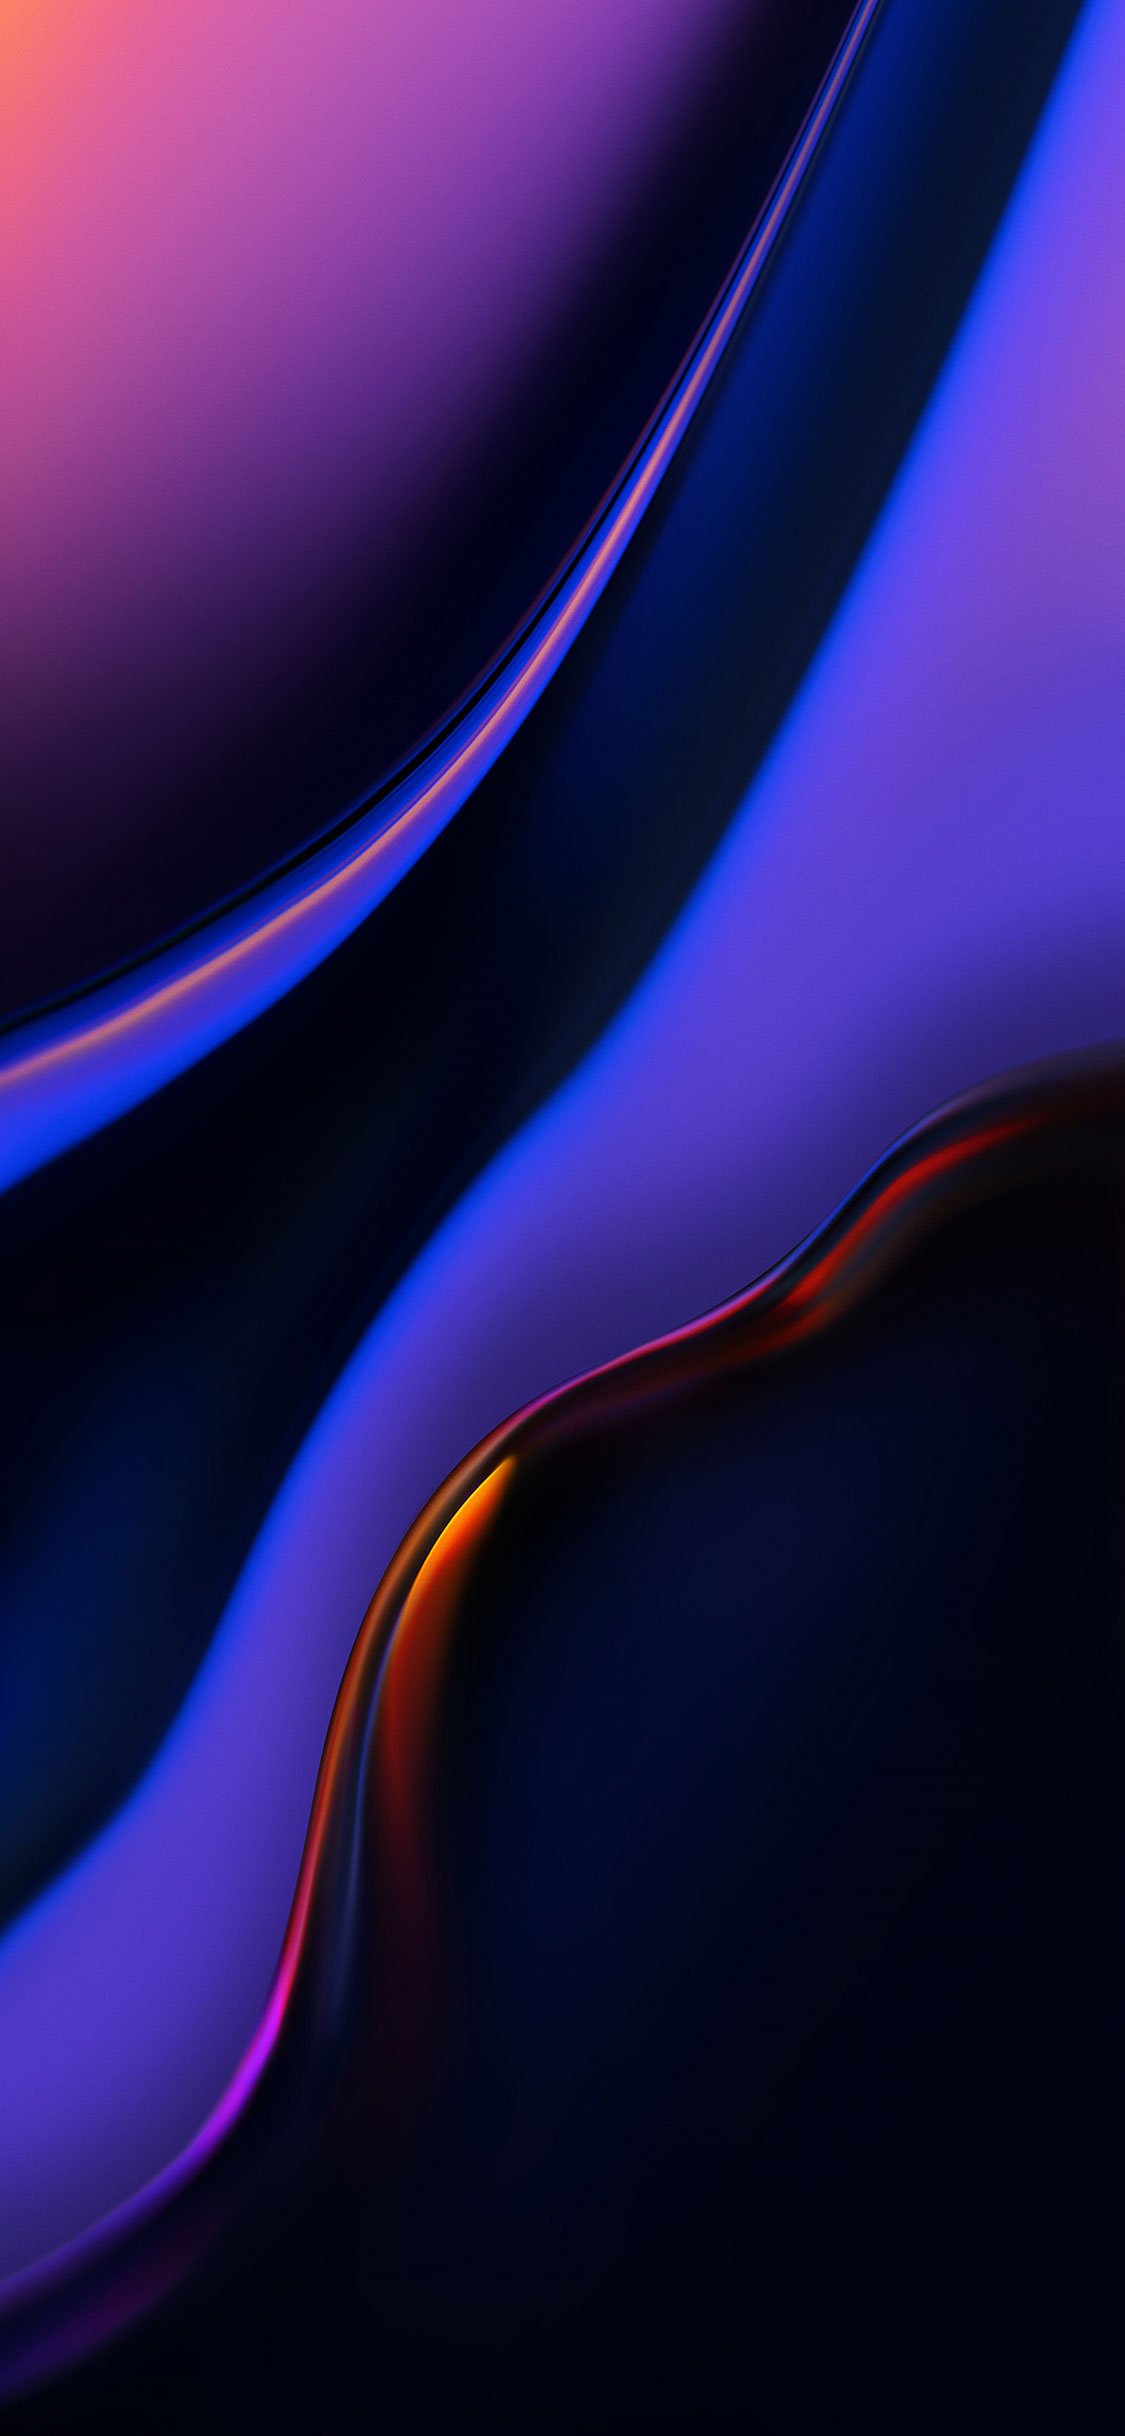 60+ Latest Best iPhone X Wallpapers & Backgrounds For ...